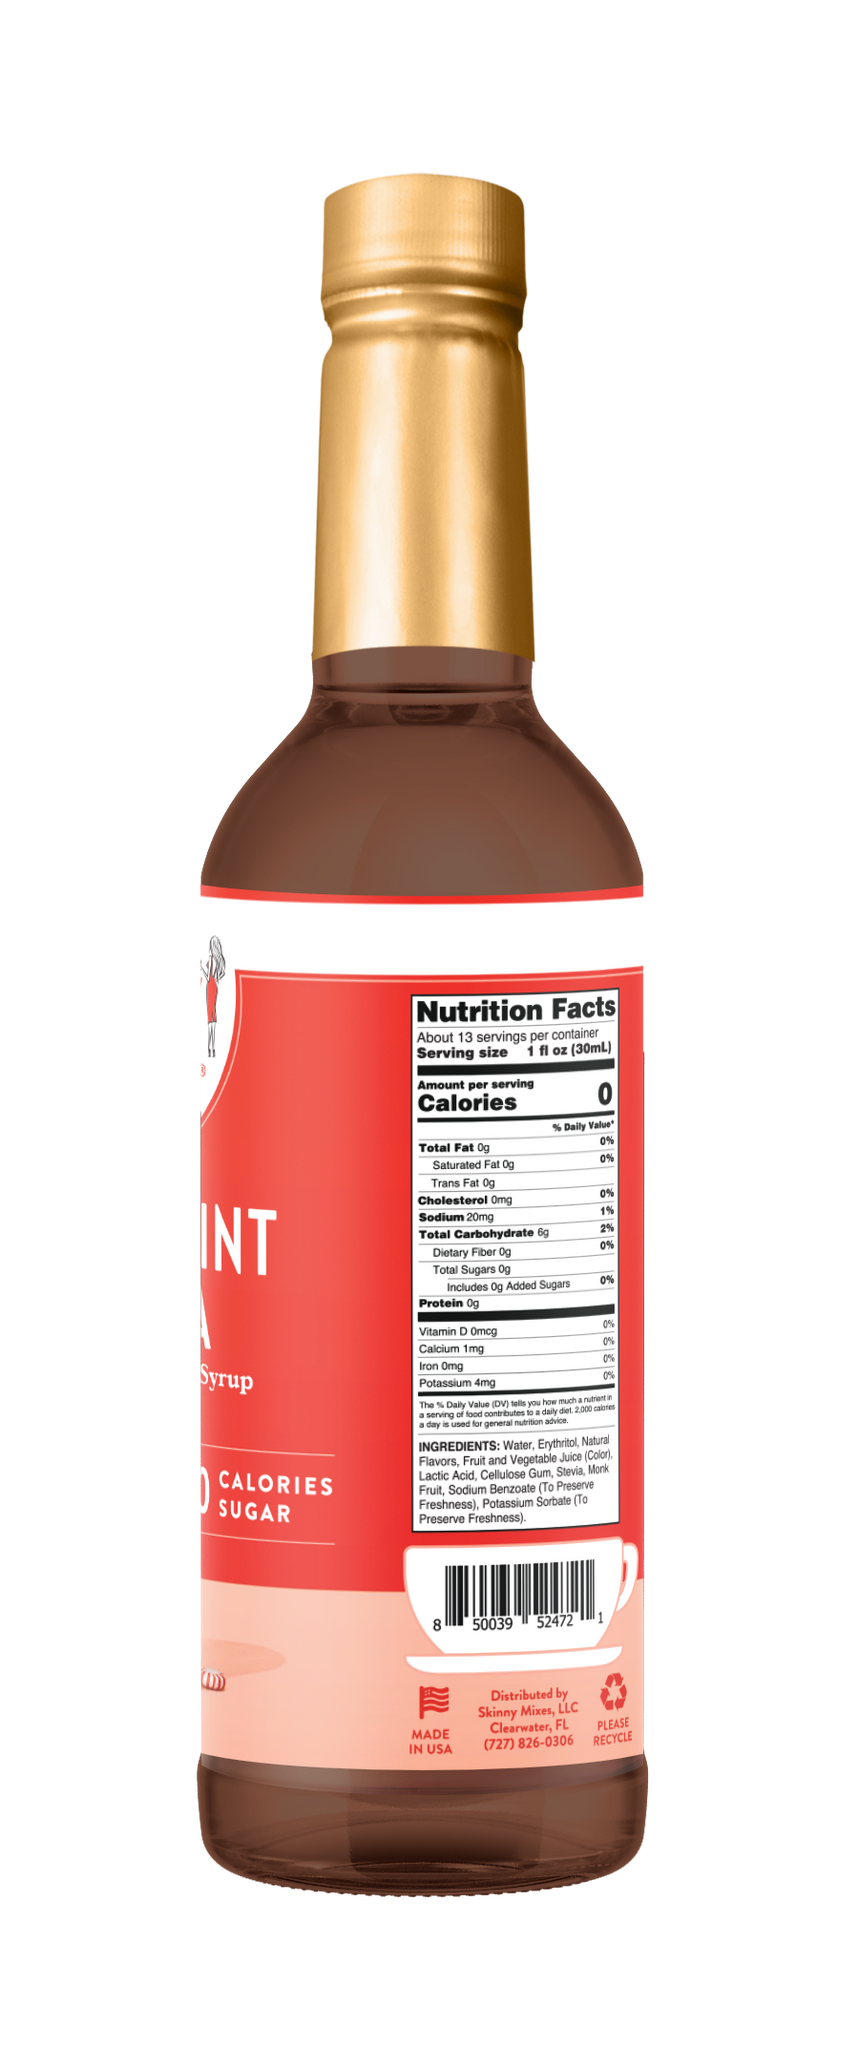 Naturally Sweetened Peppermint Mocha Syrup - 375ml